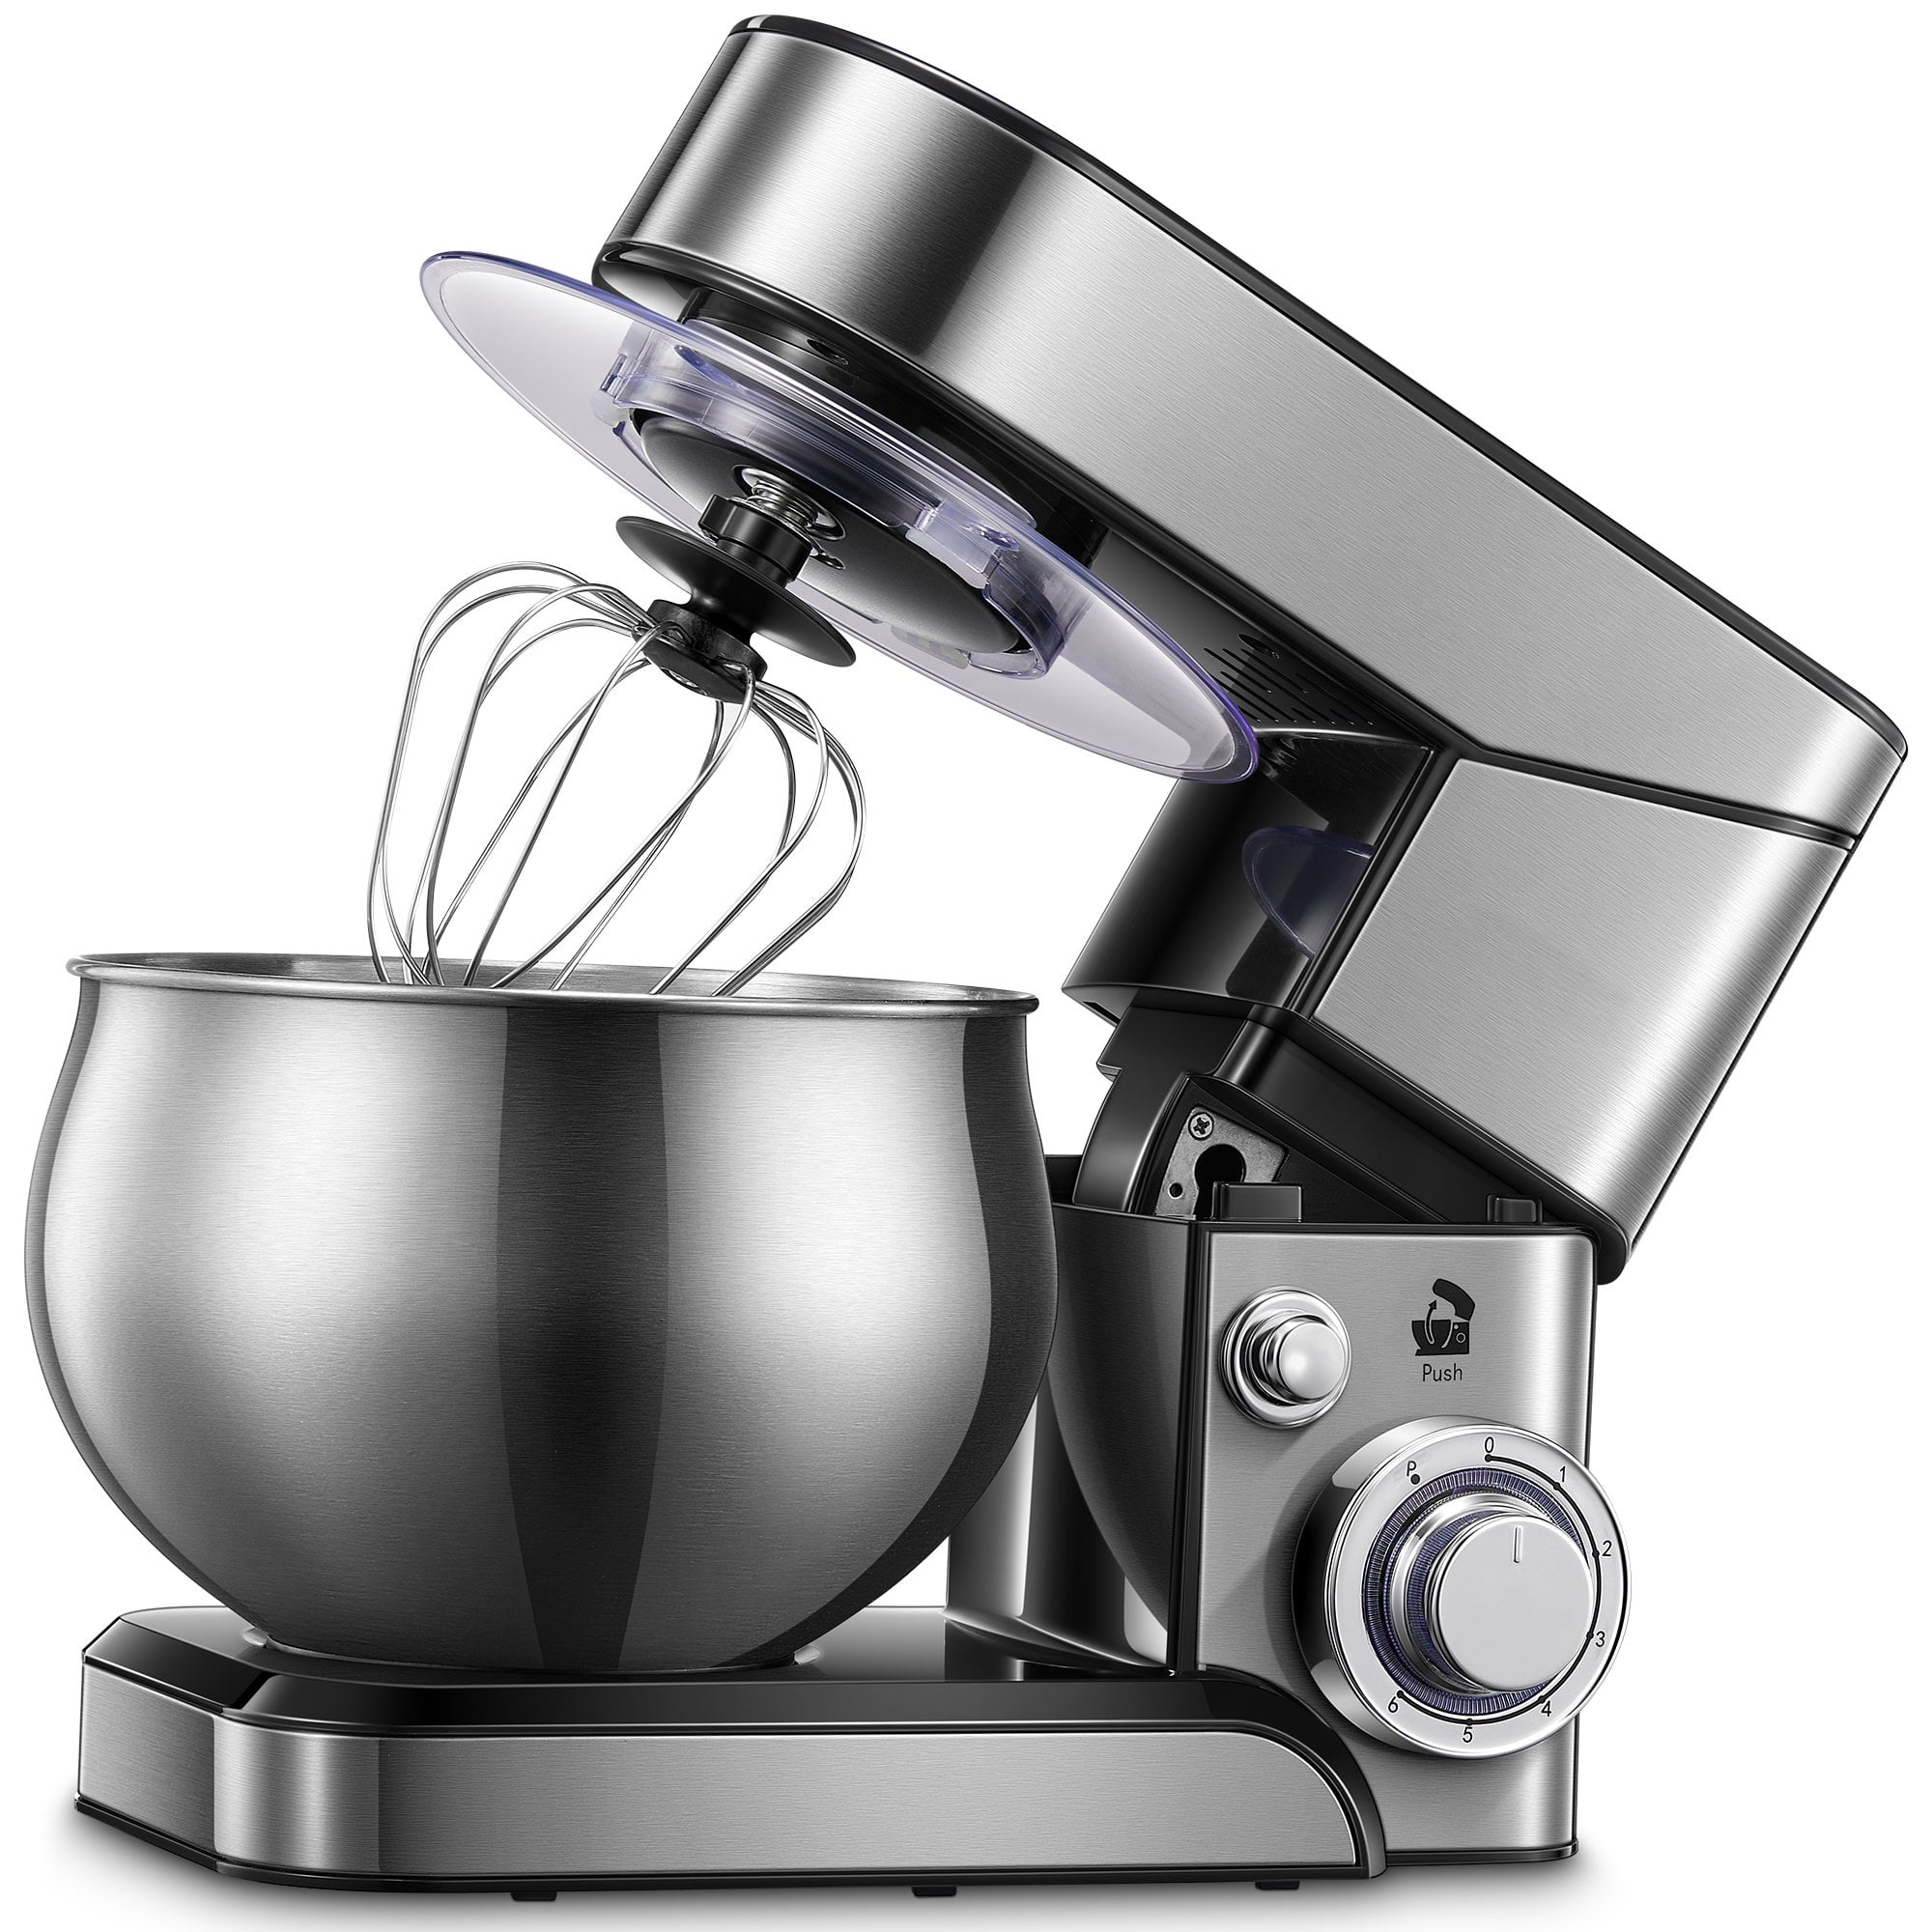 Refurbished KitchenAid sale: Save 30% on our favorite stand mixer